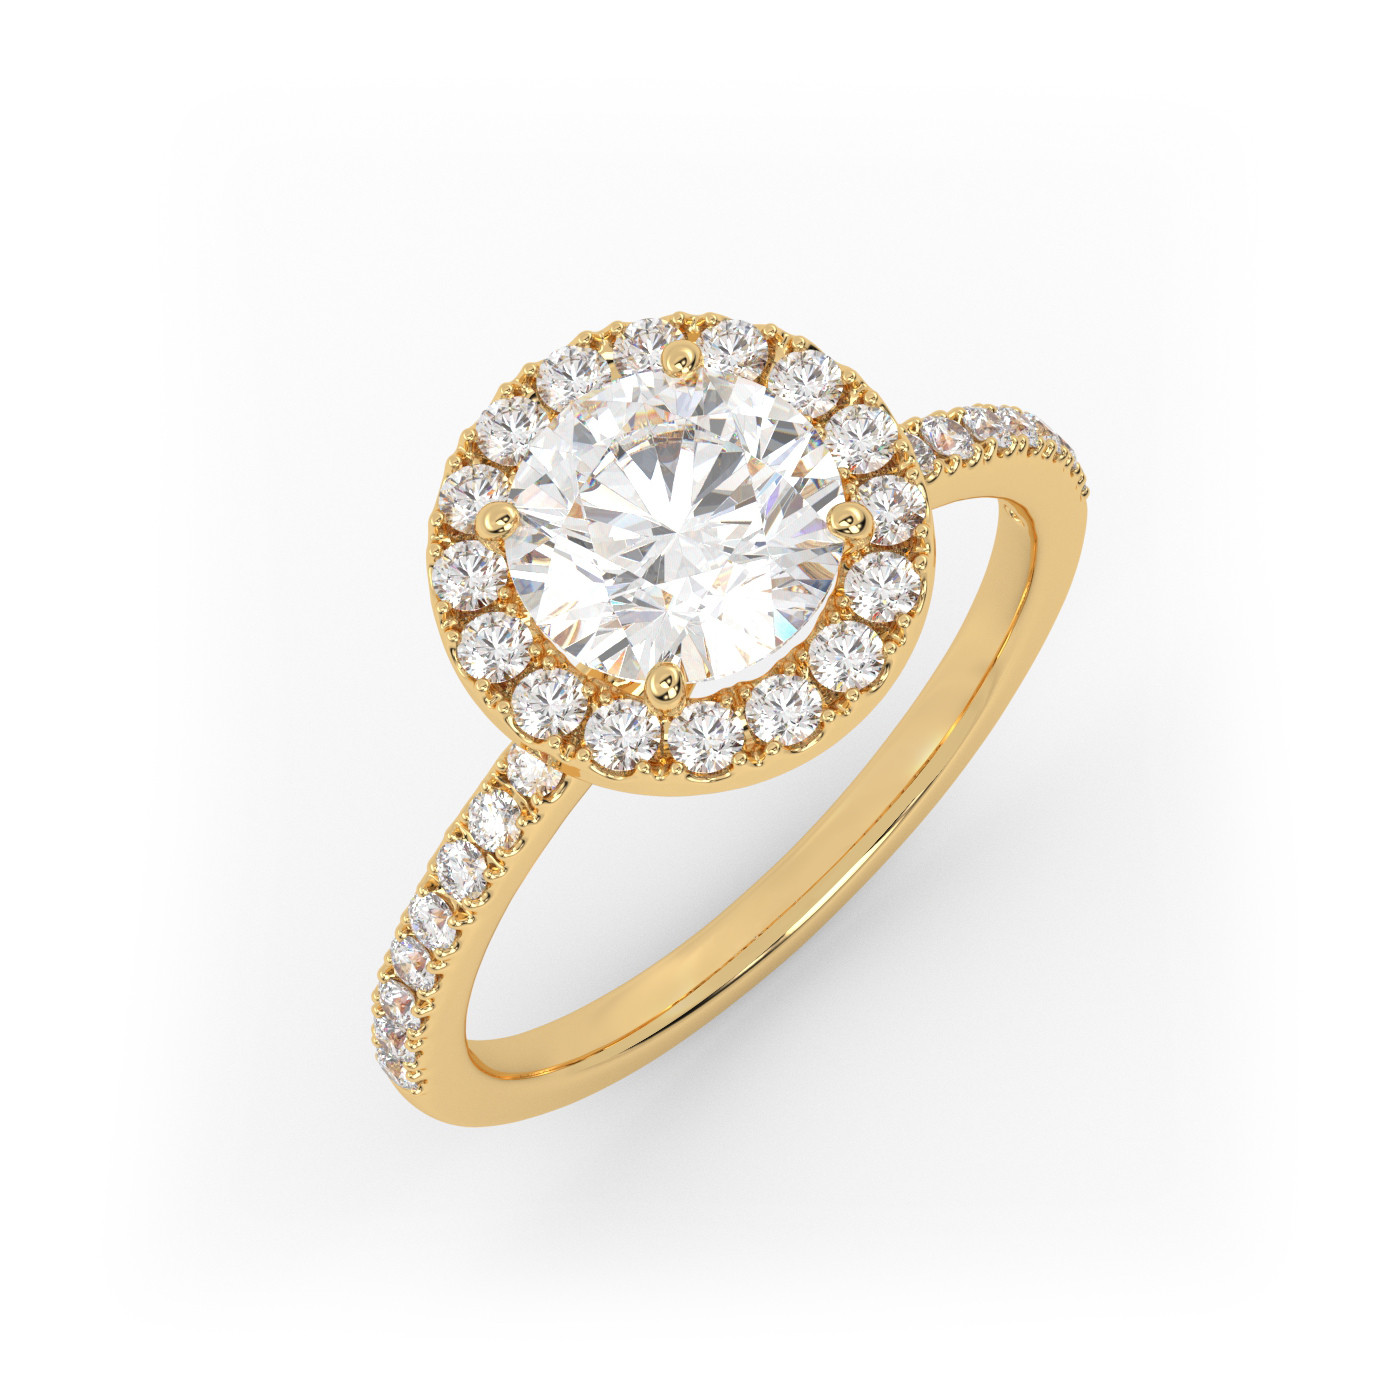 18K YELLOW GOLD Round Cut Diamond Engagement Ring with Halo and Pave style